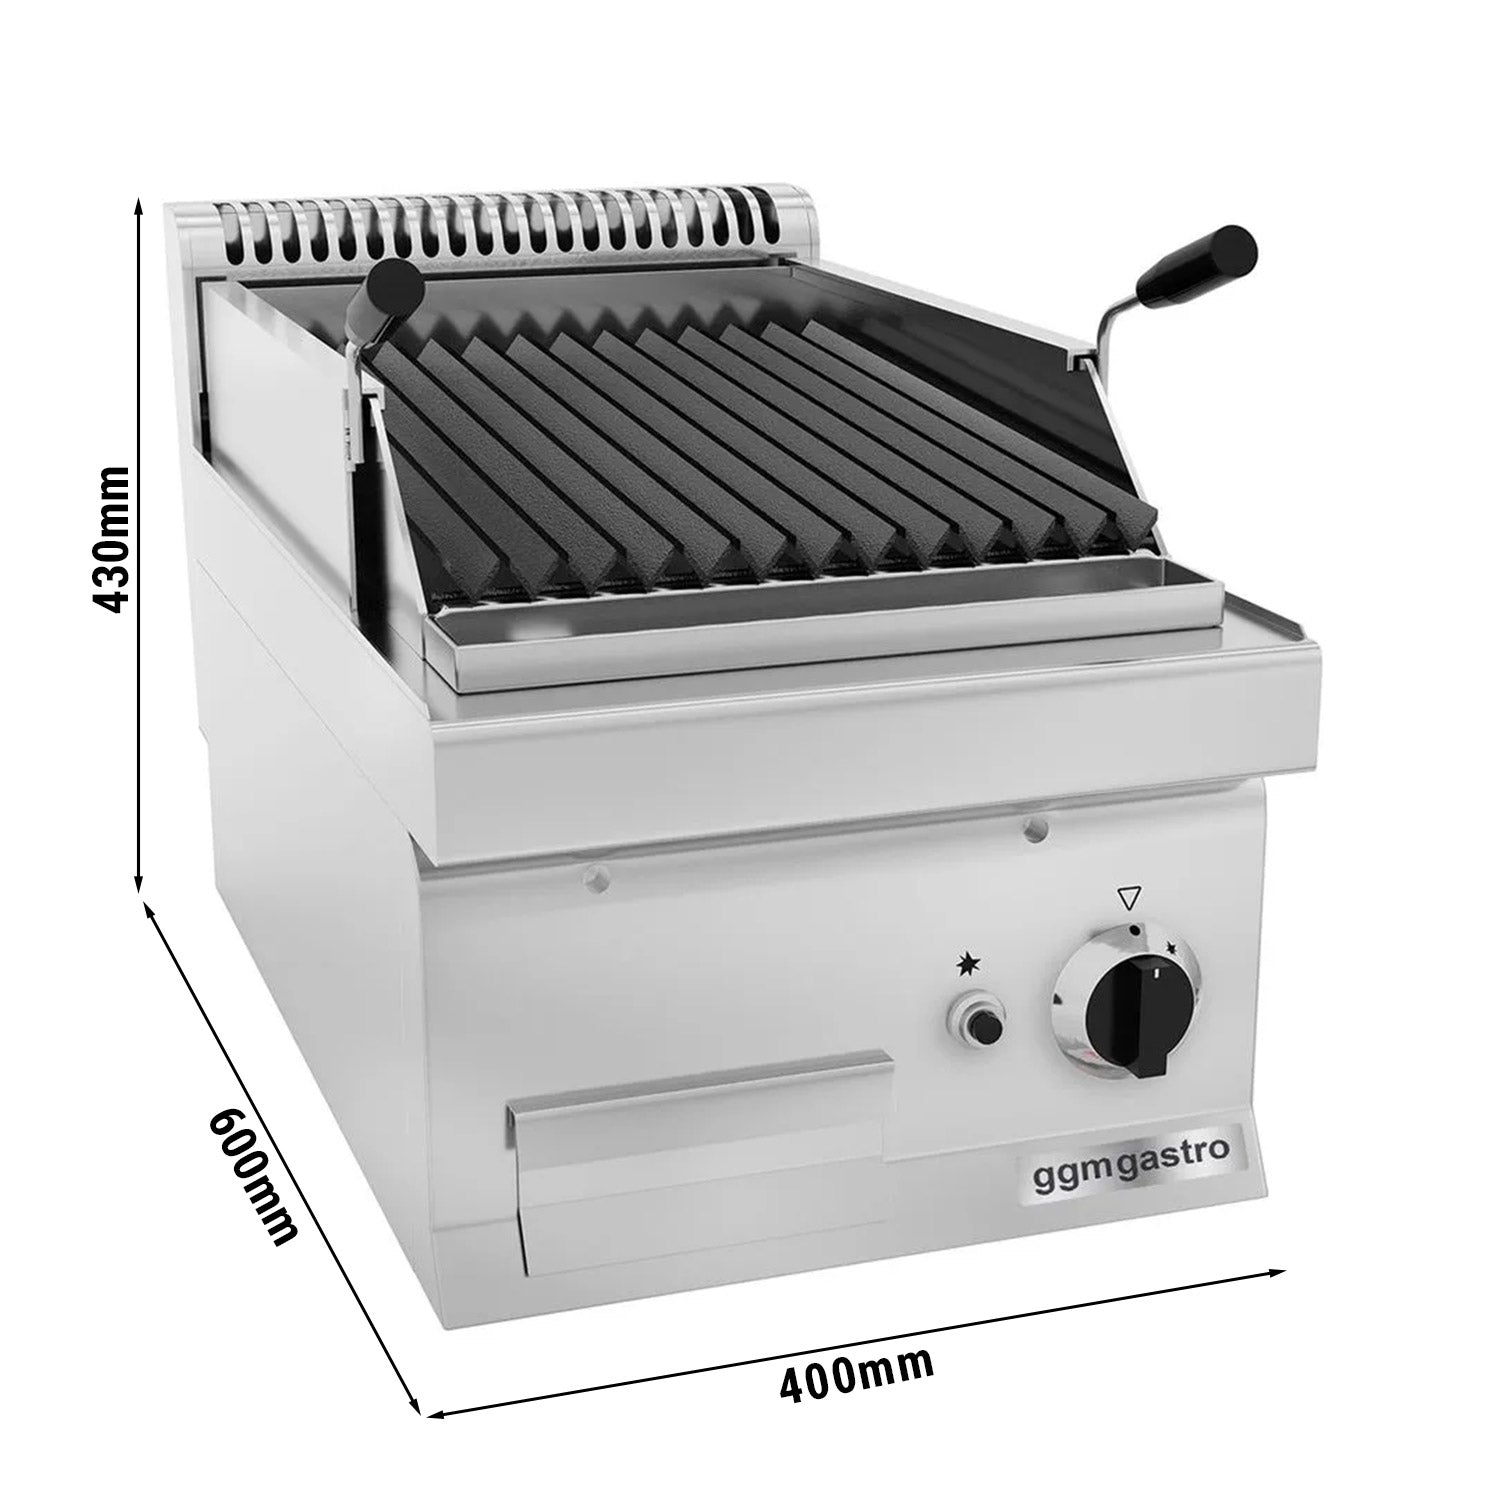 Gass lavastein Grill (7 kW)-sving matlaging Grill